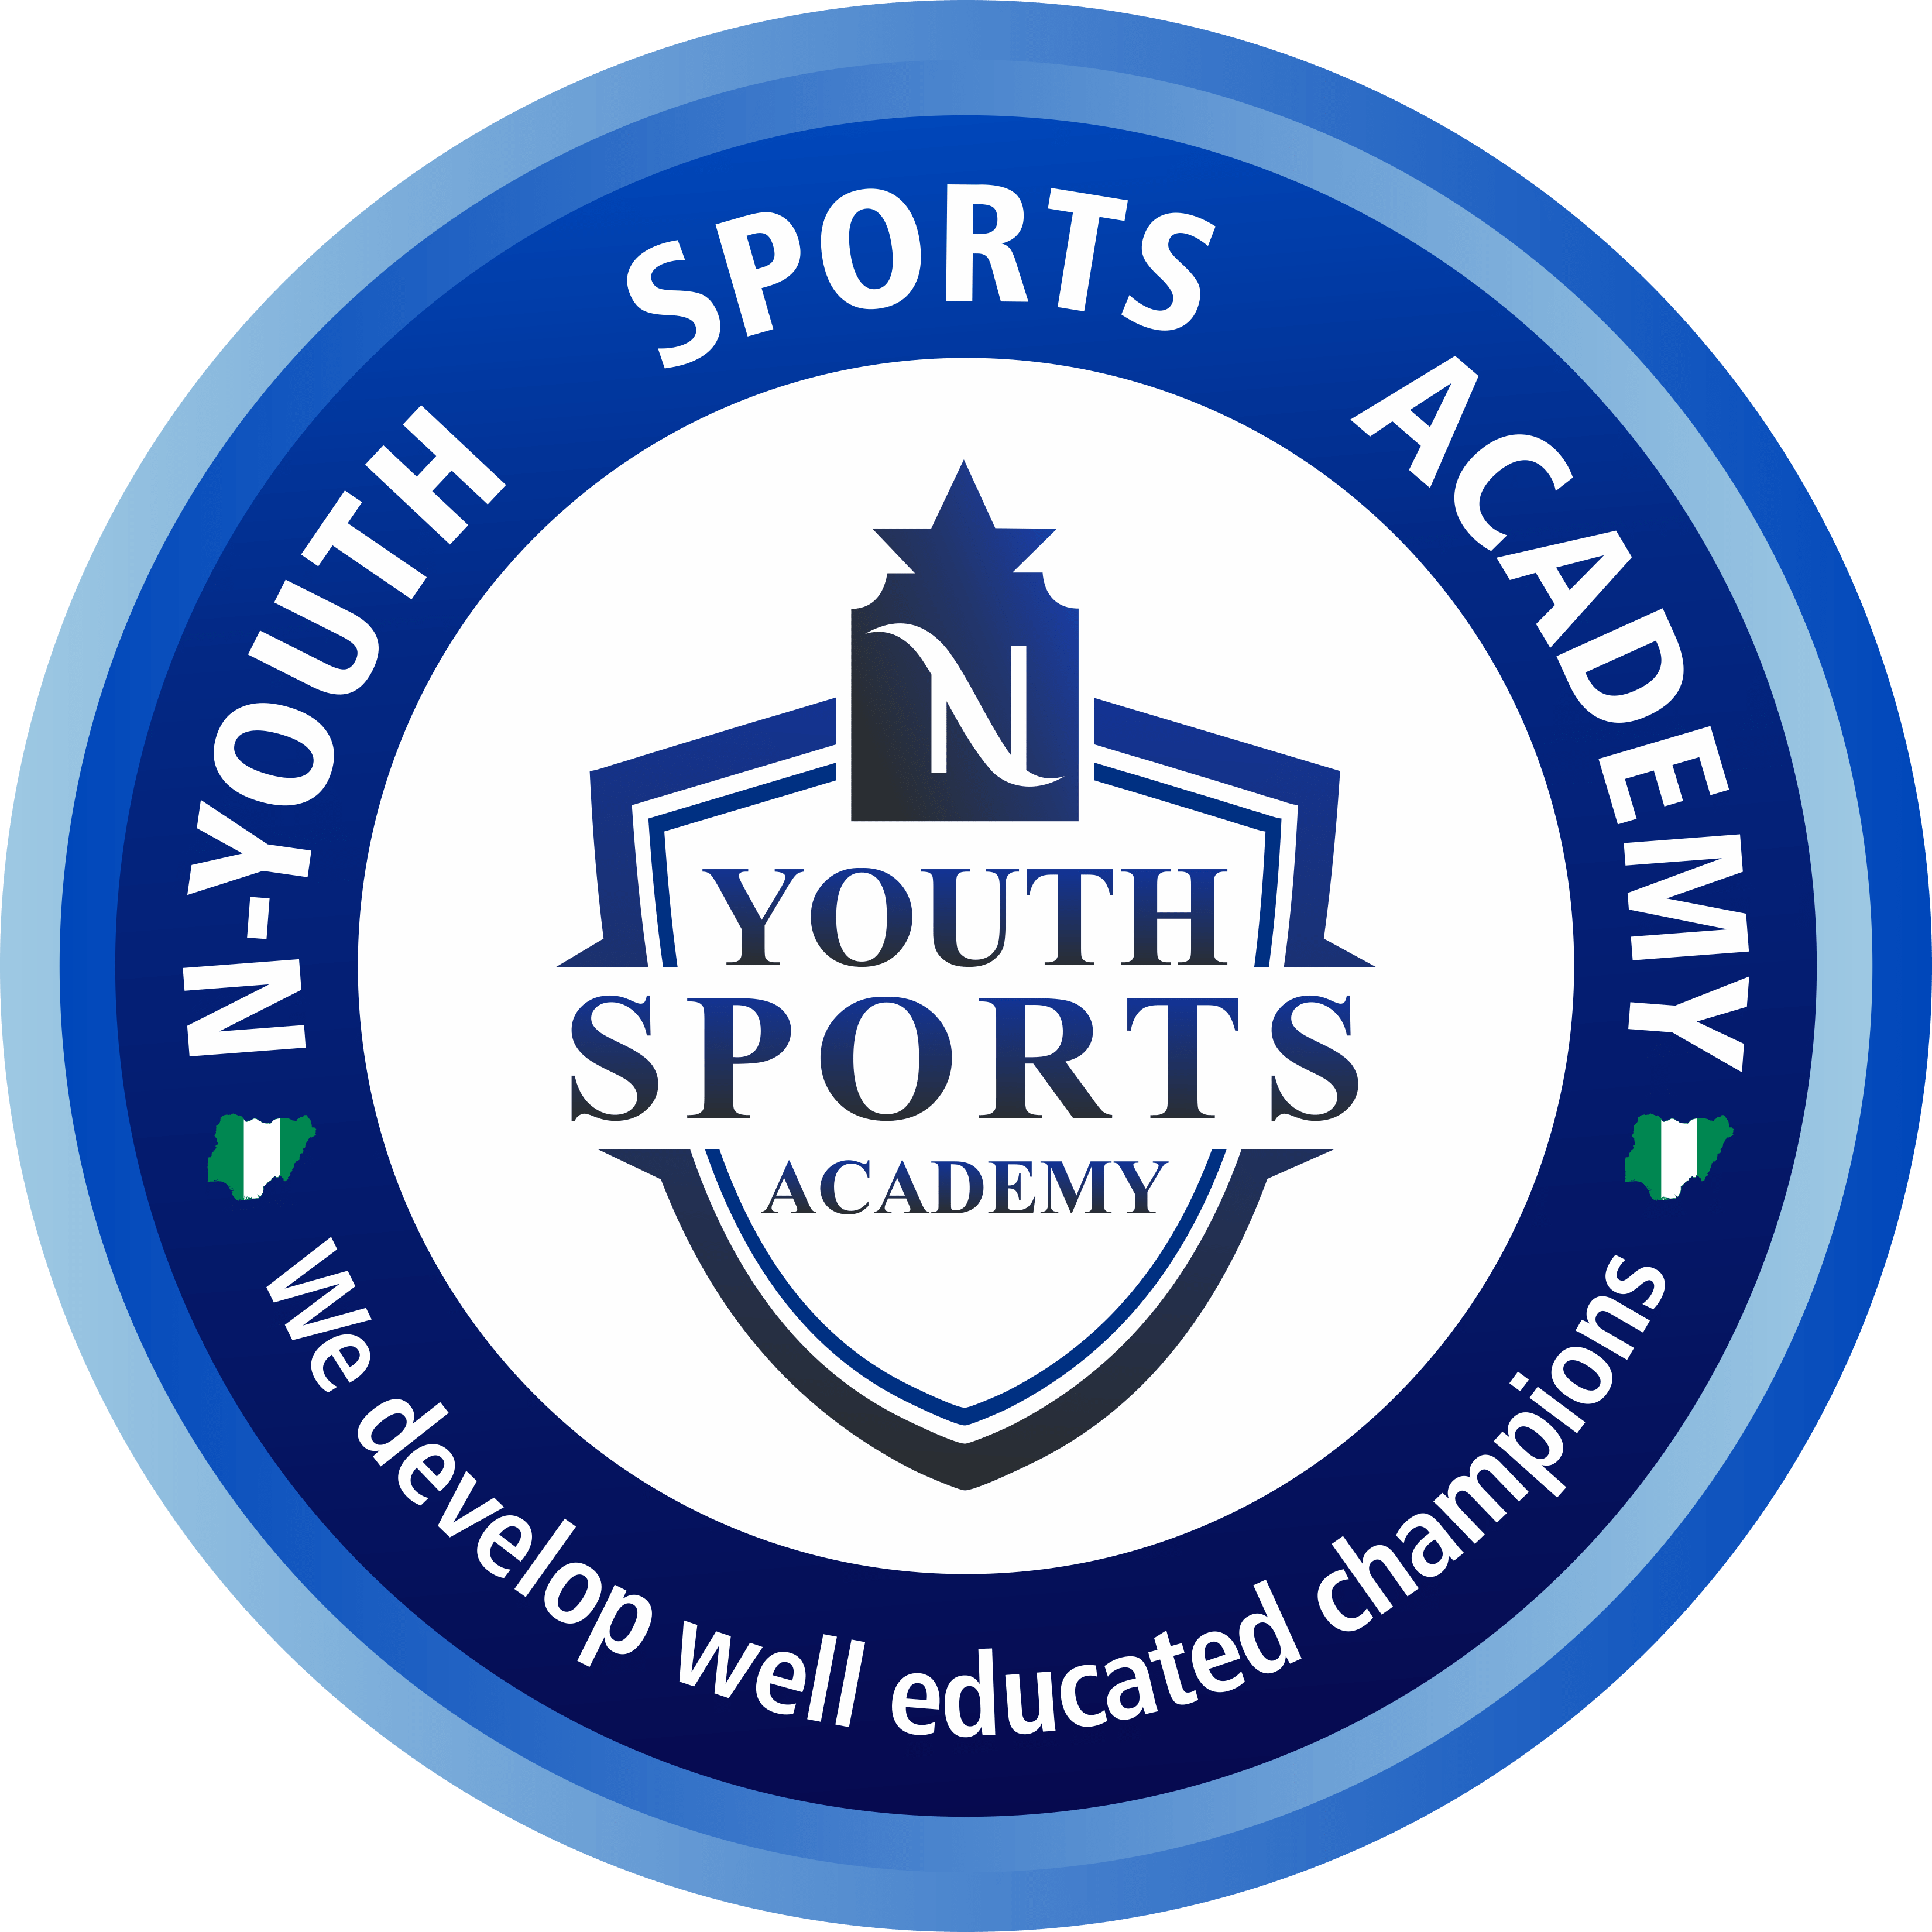 Nyouth sport acdemy